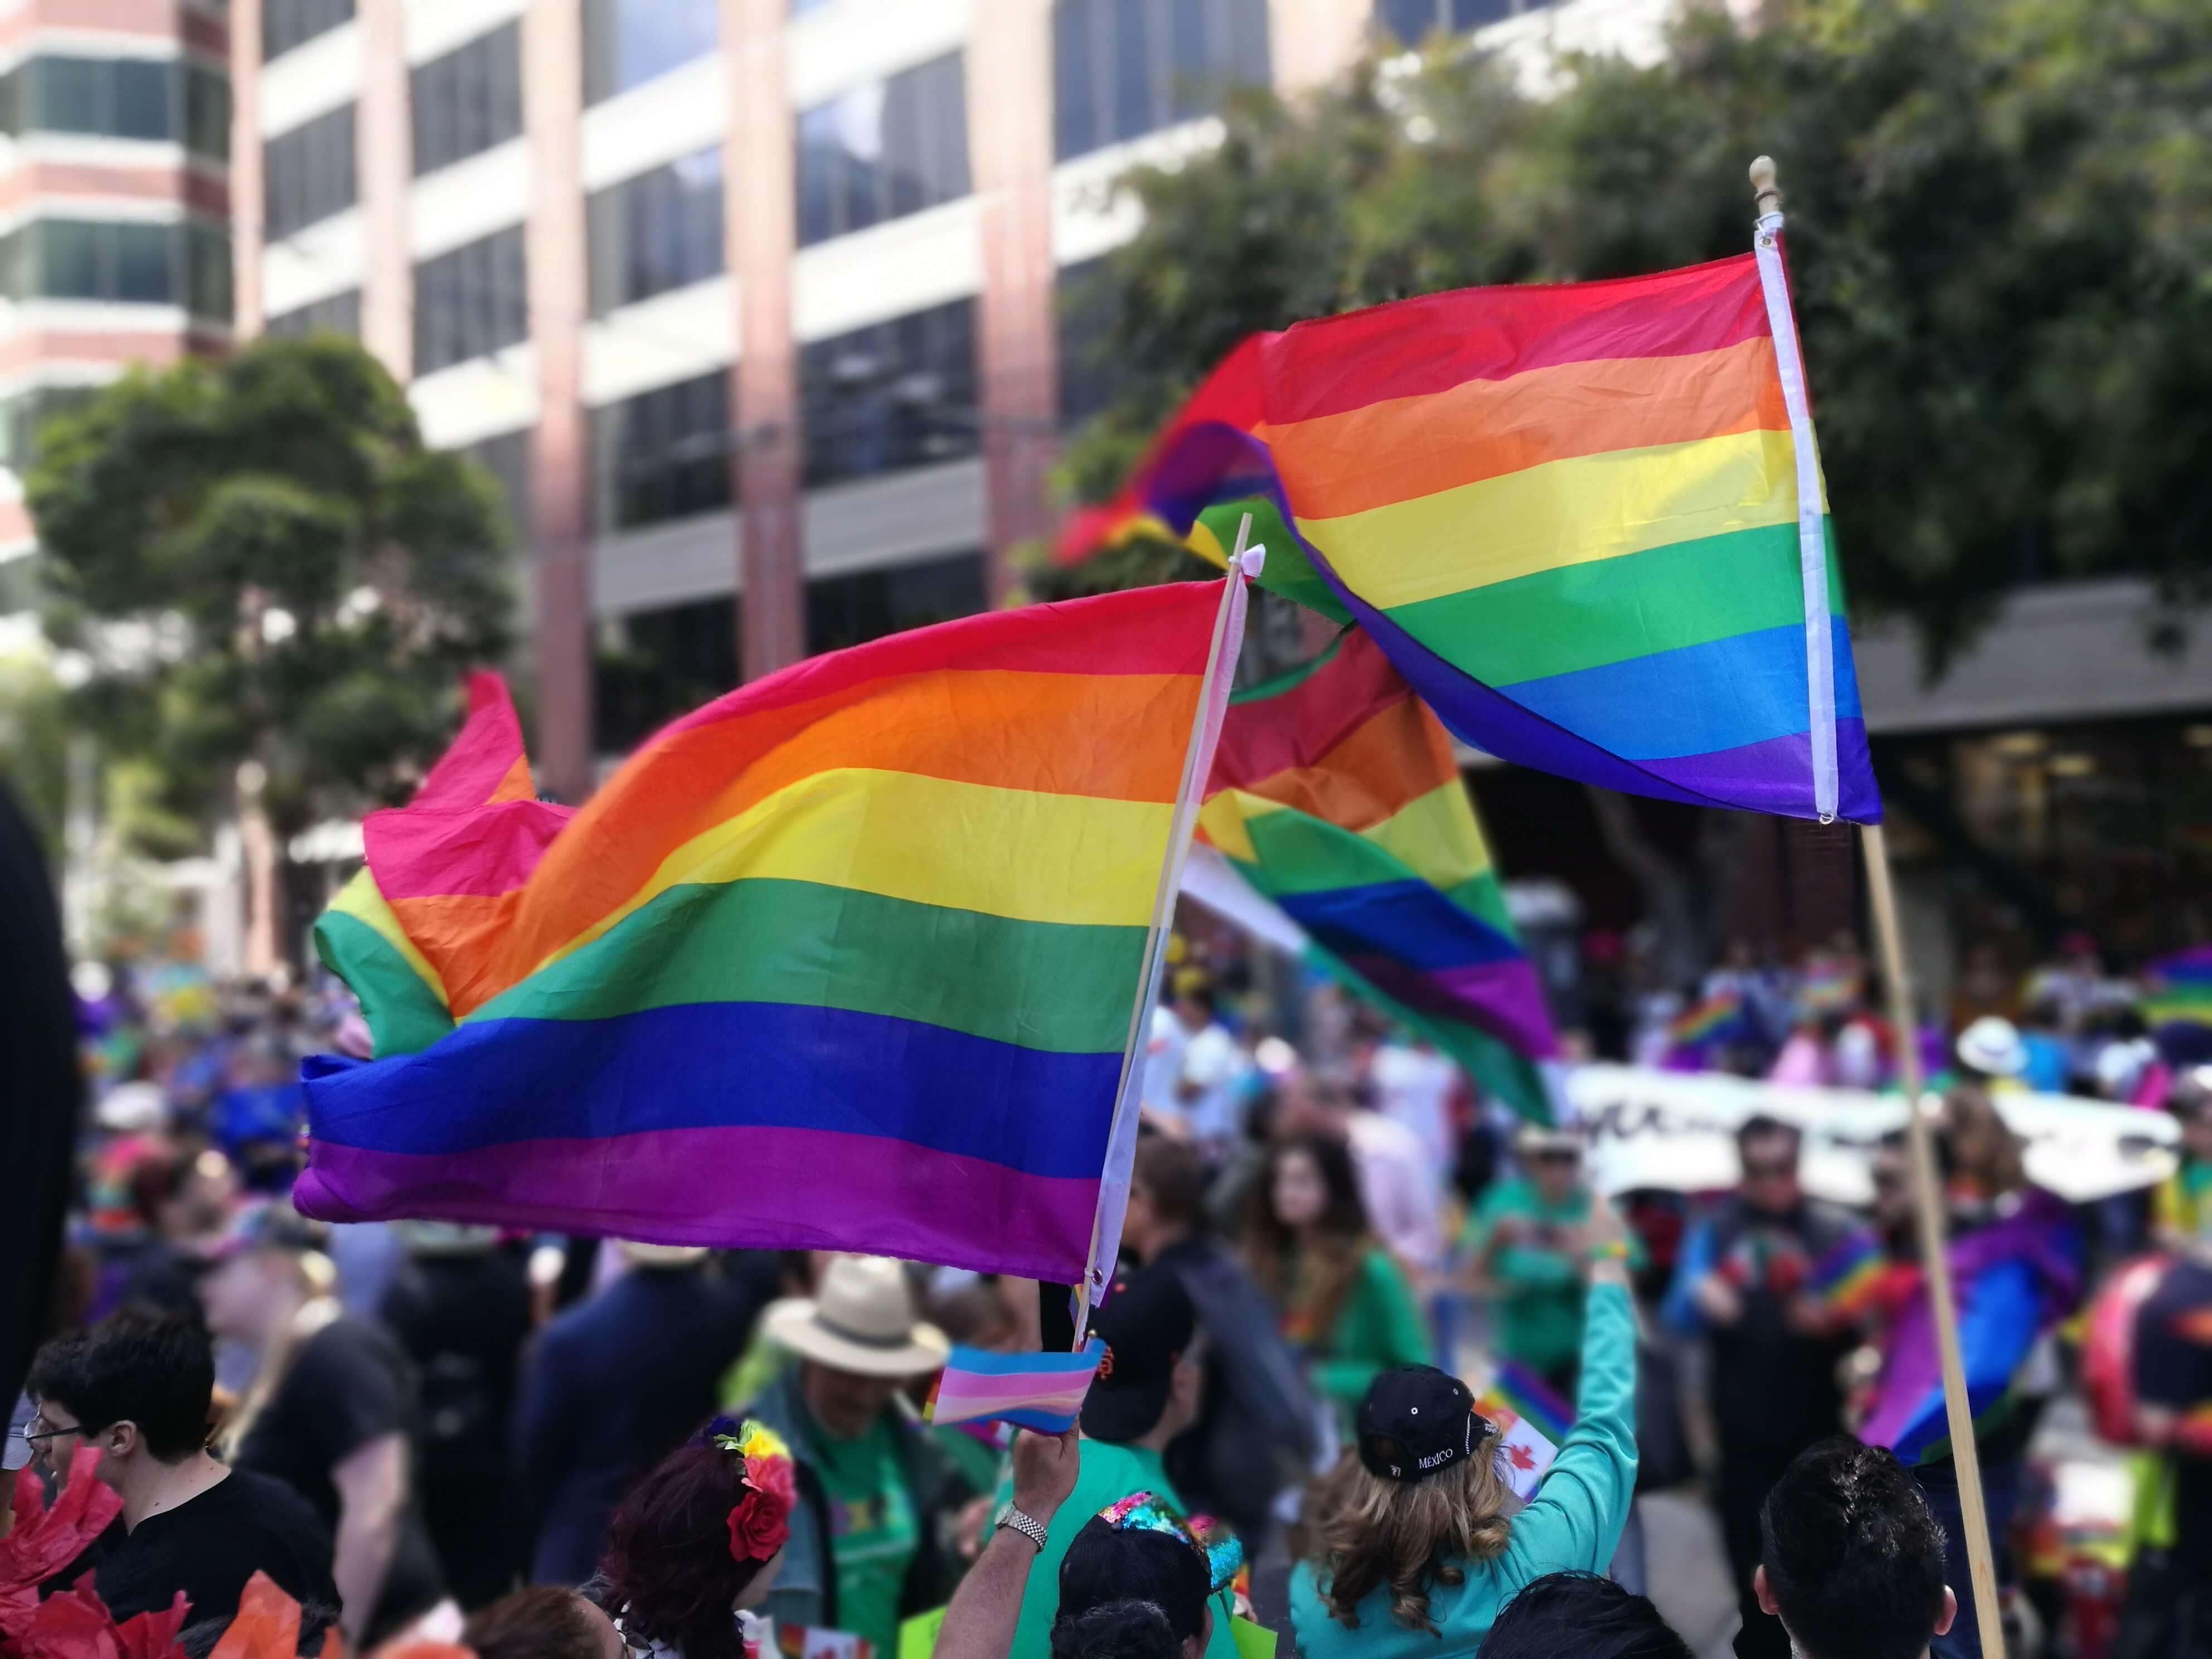 A crowd of people holding and waving rainbow-striped pride flags.